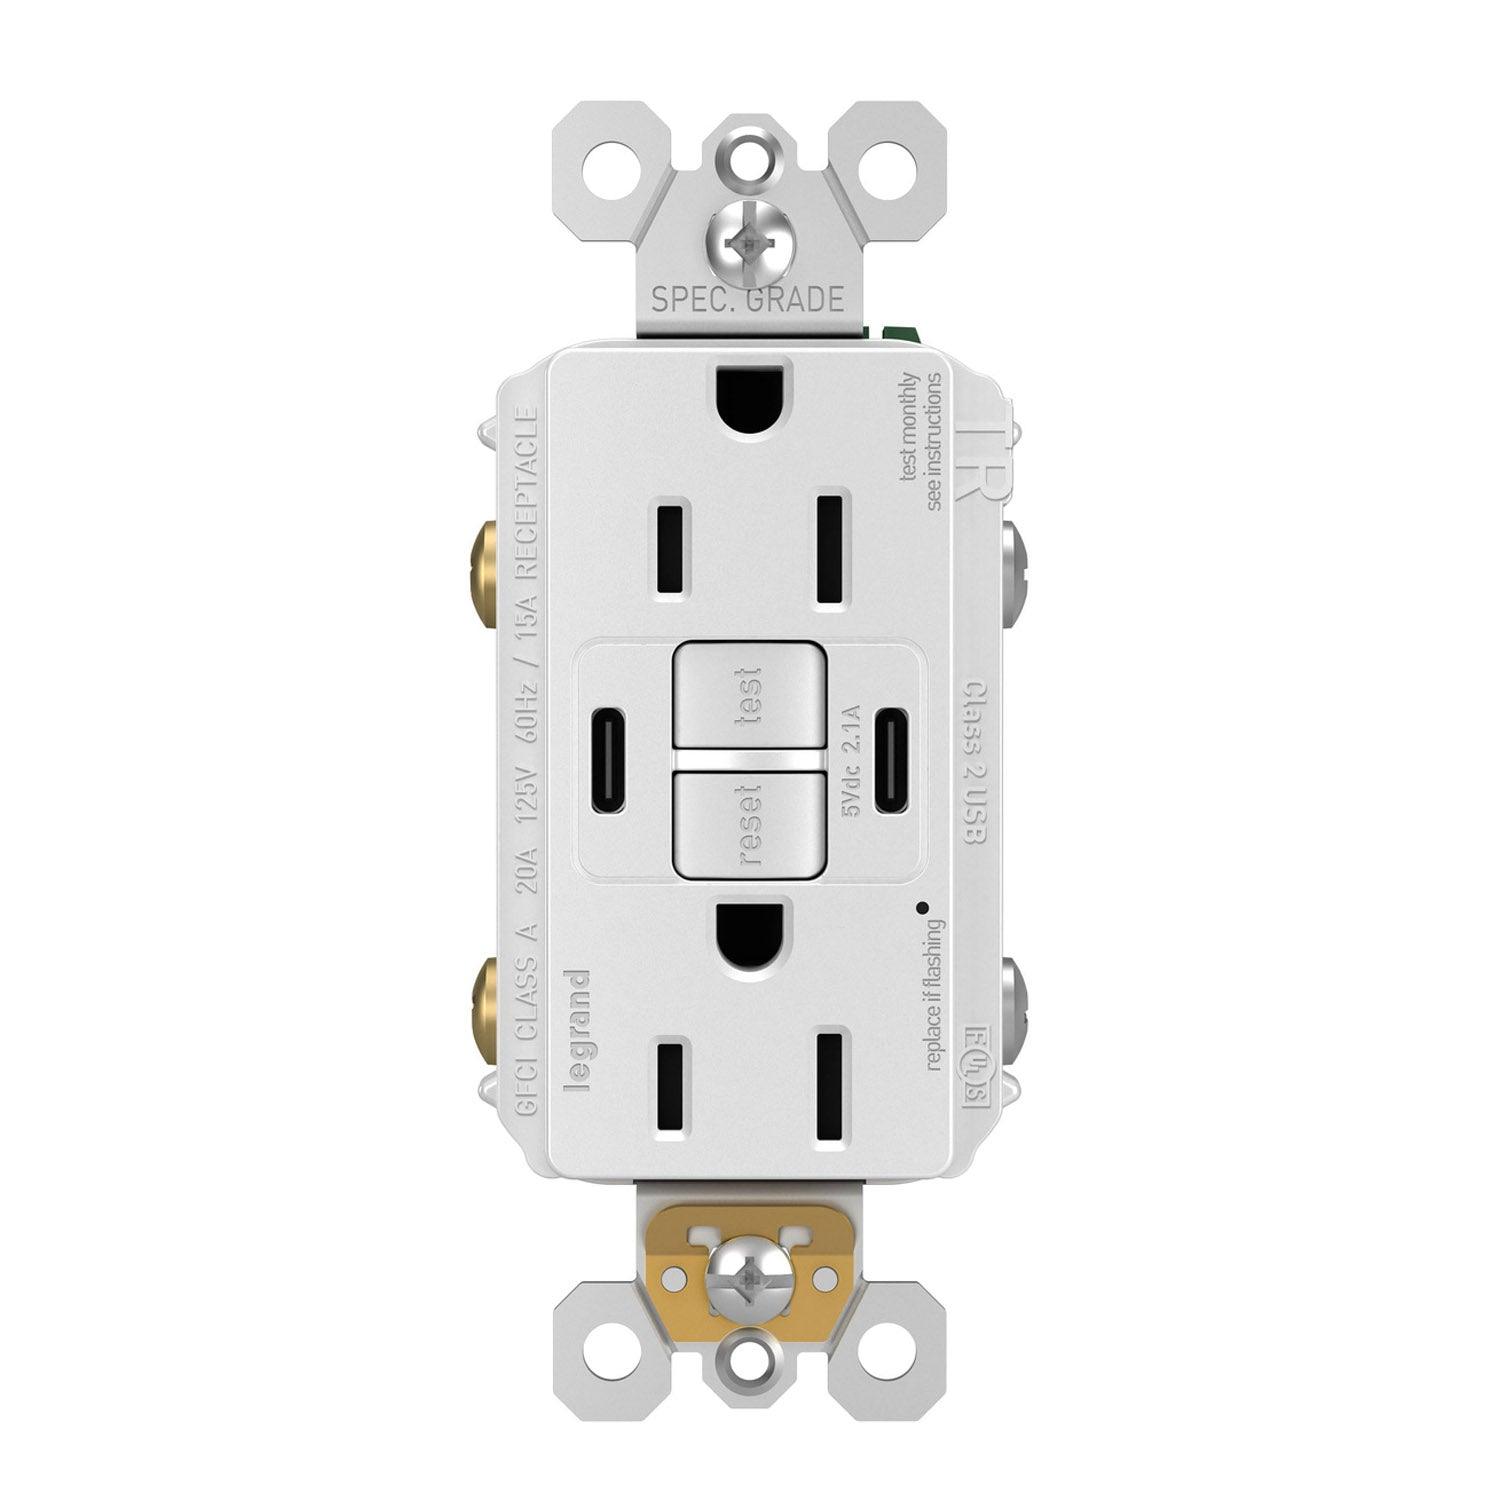 Radiant 15 Amp GFCI Outlet with USB-C Outlet Tamper-Resistant White - Bees Lighting